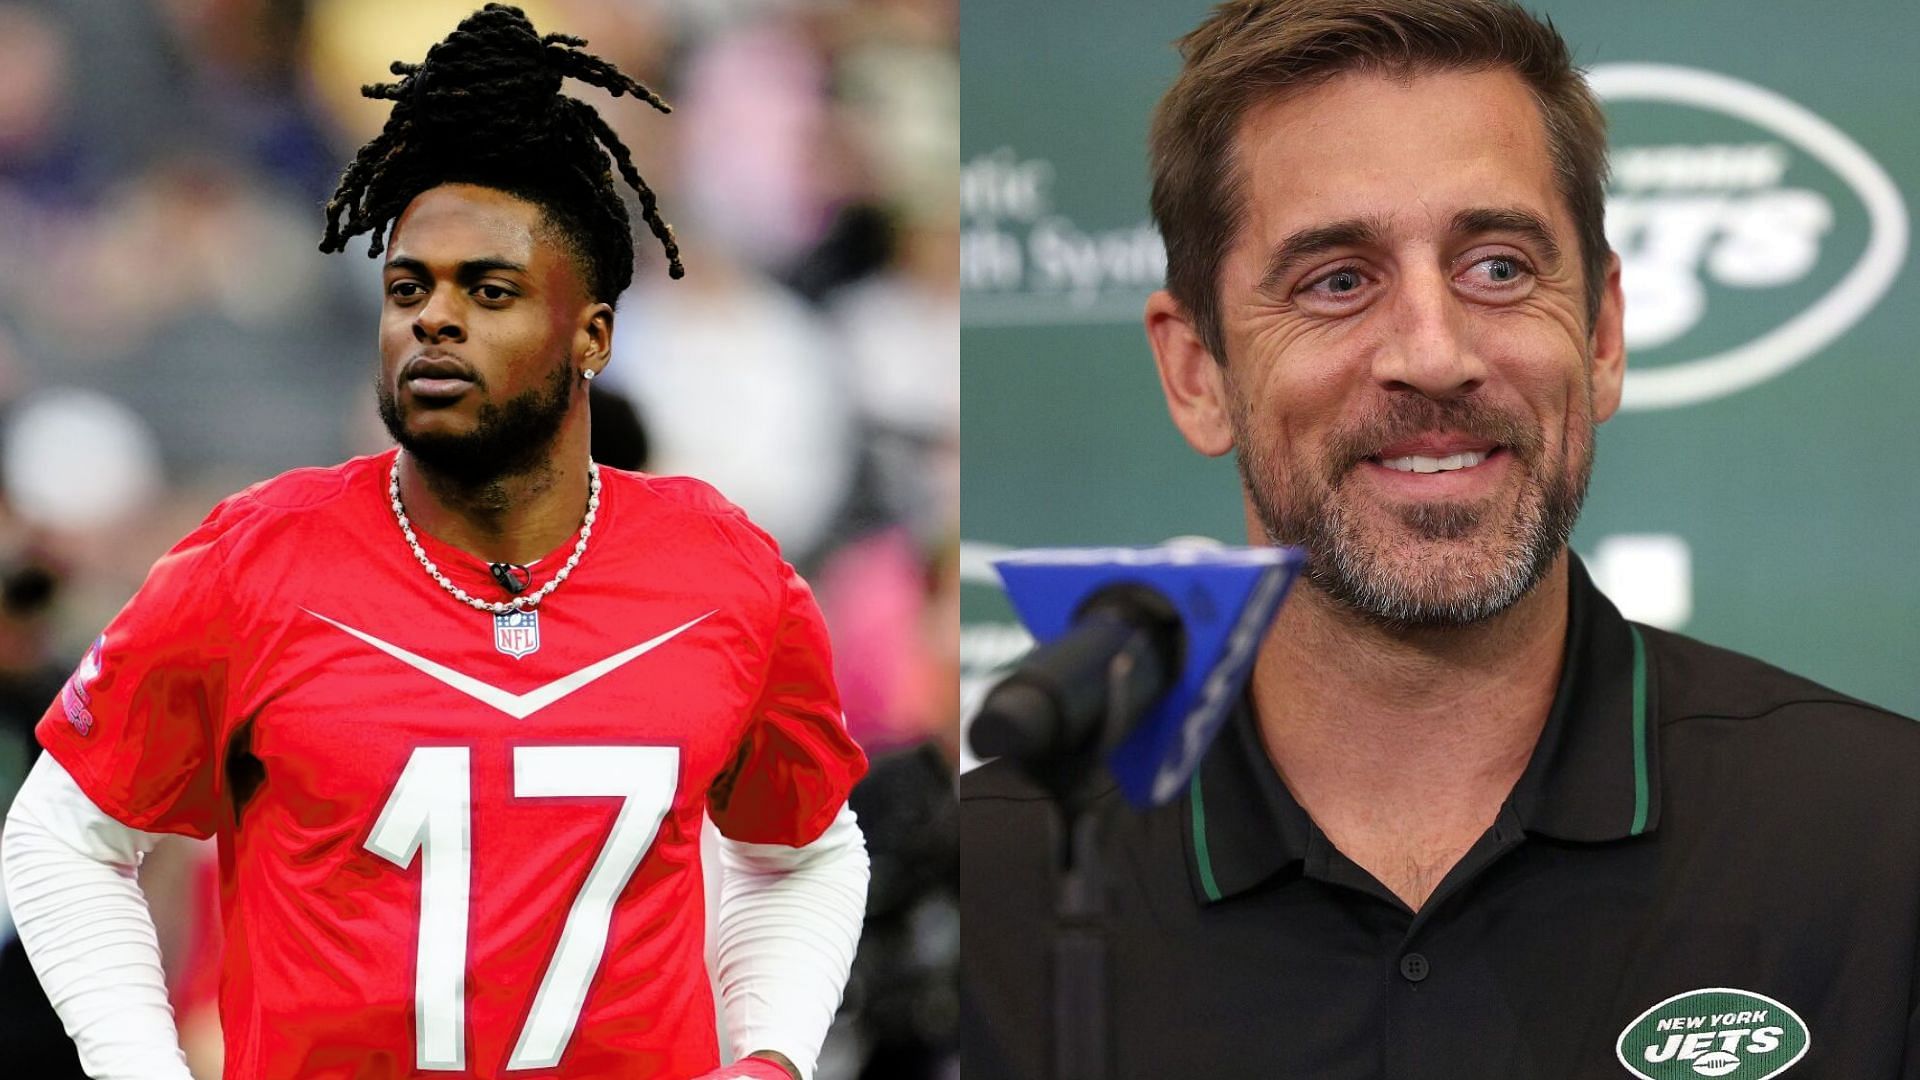 Wide receiver Davante Adams is fascinated with golf like his former quarterback Aaron Rodgers.